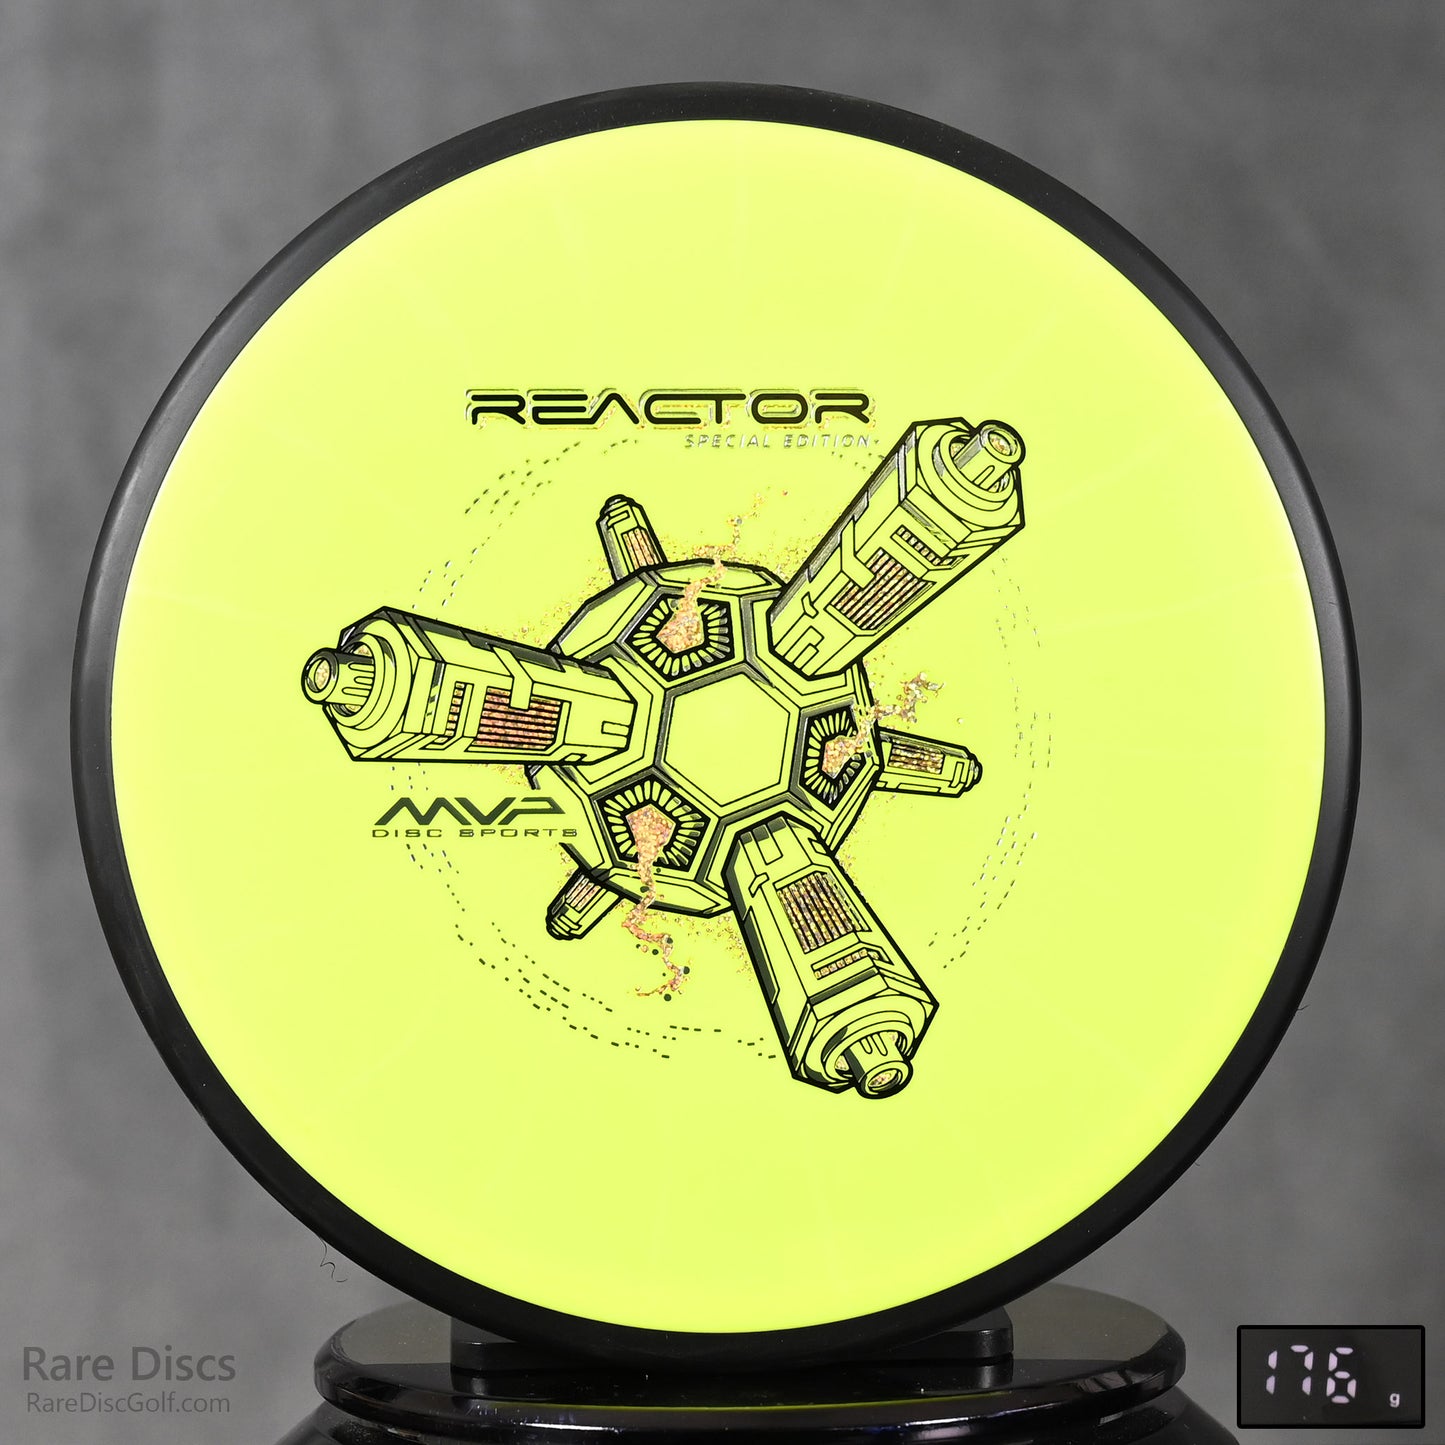 MVP Reactor - Fission Special Edition